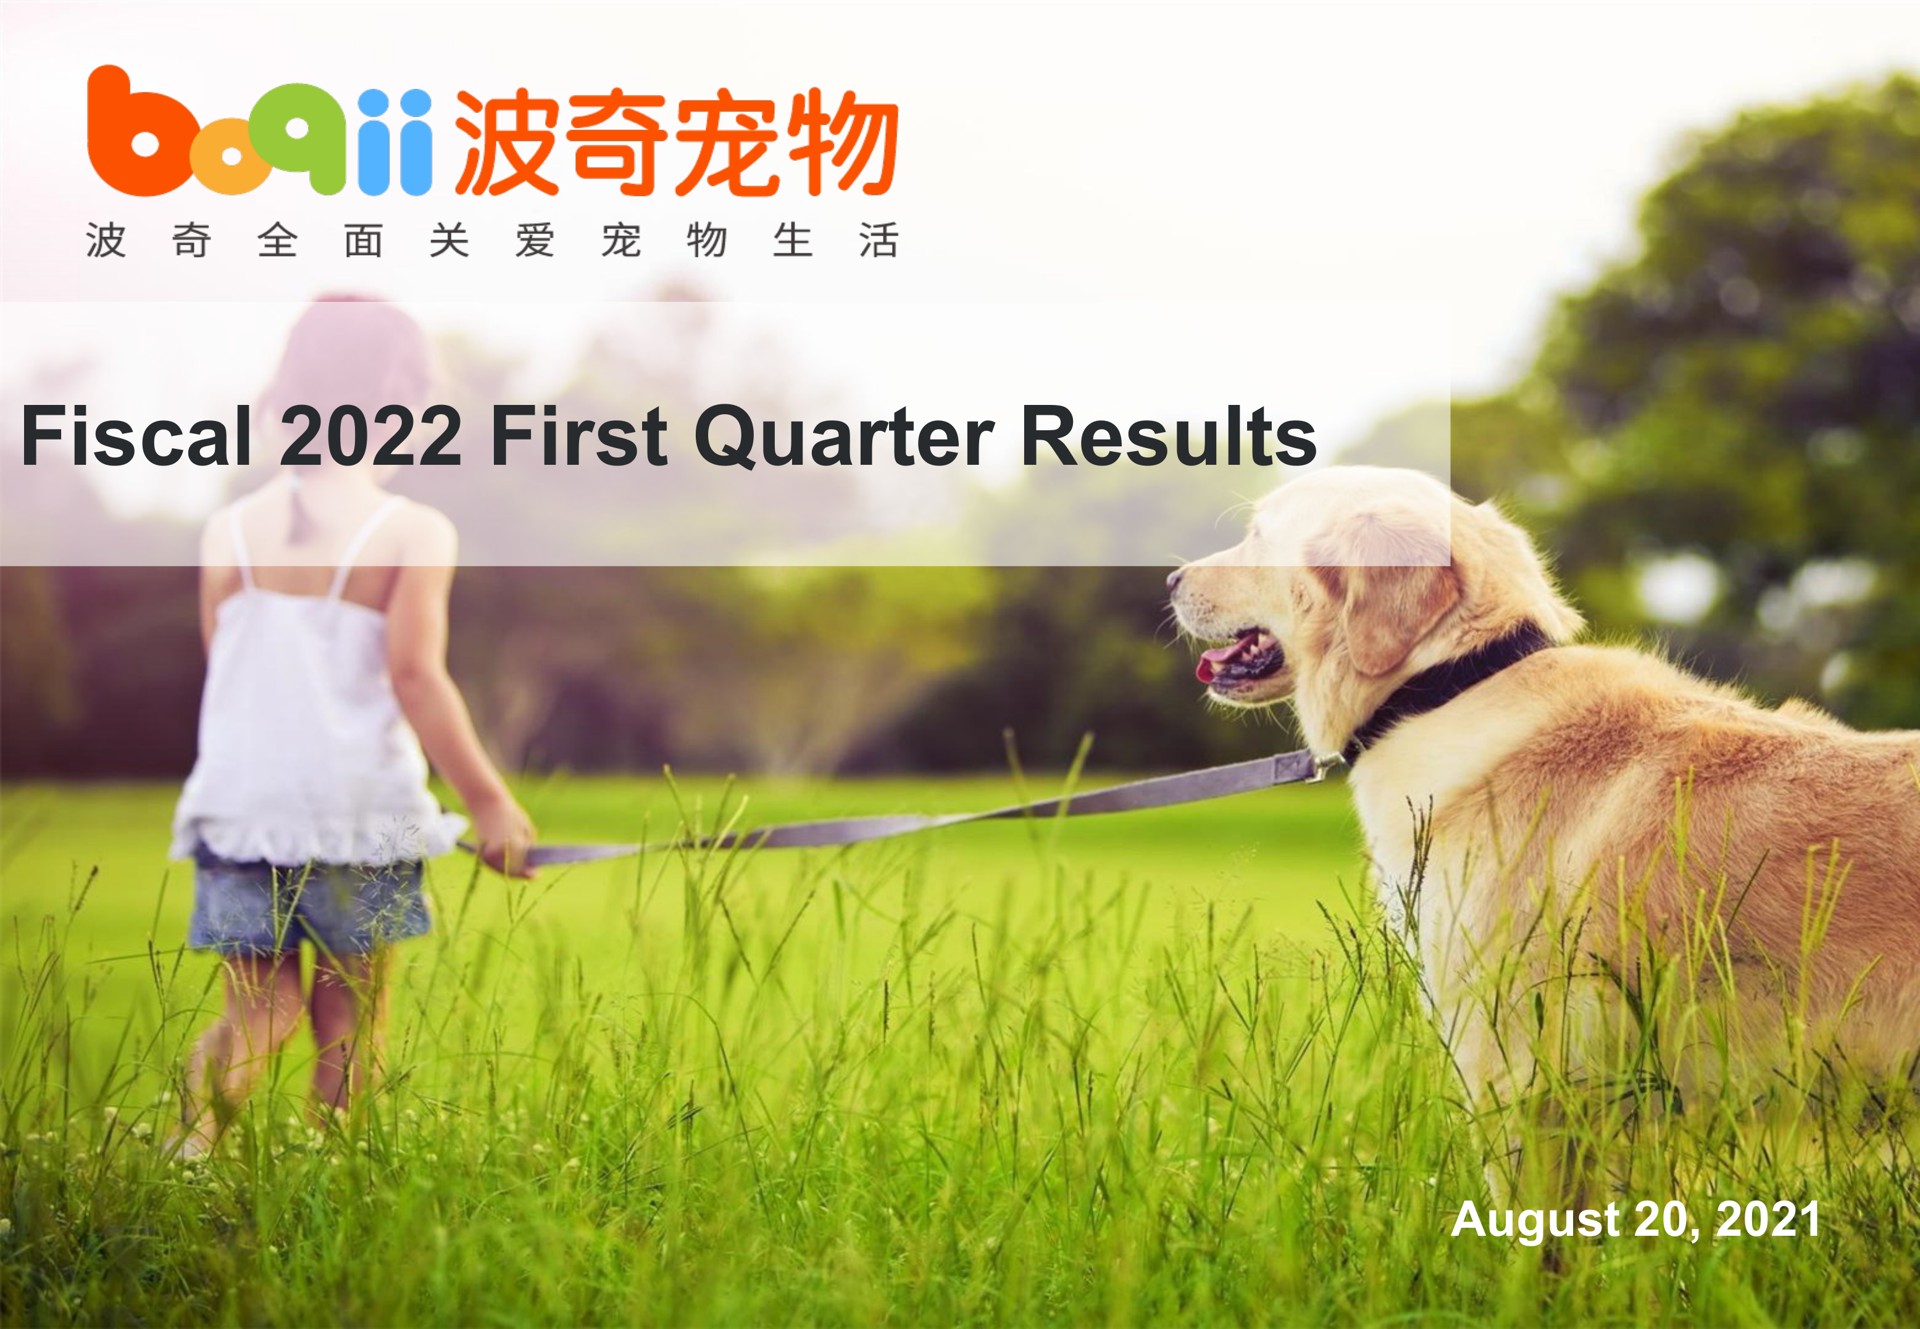 fiscal first quarter results august | Boqii Holding